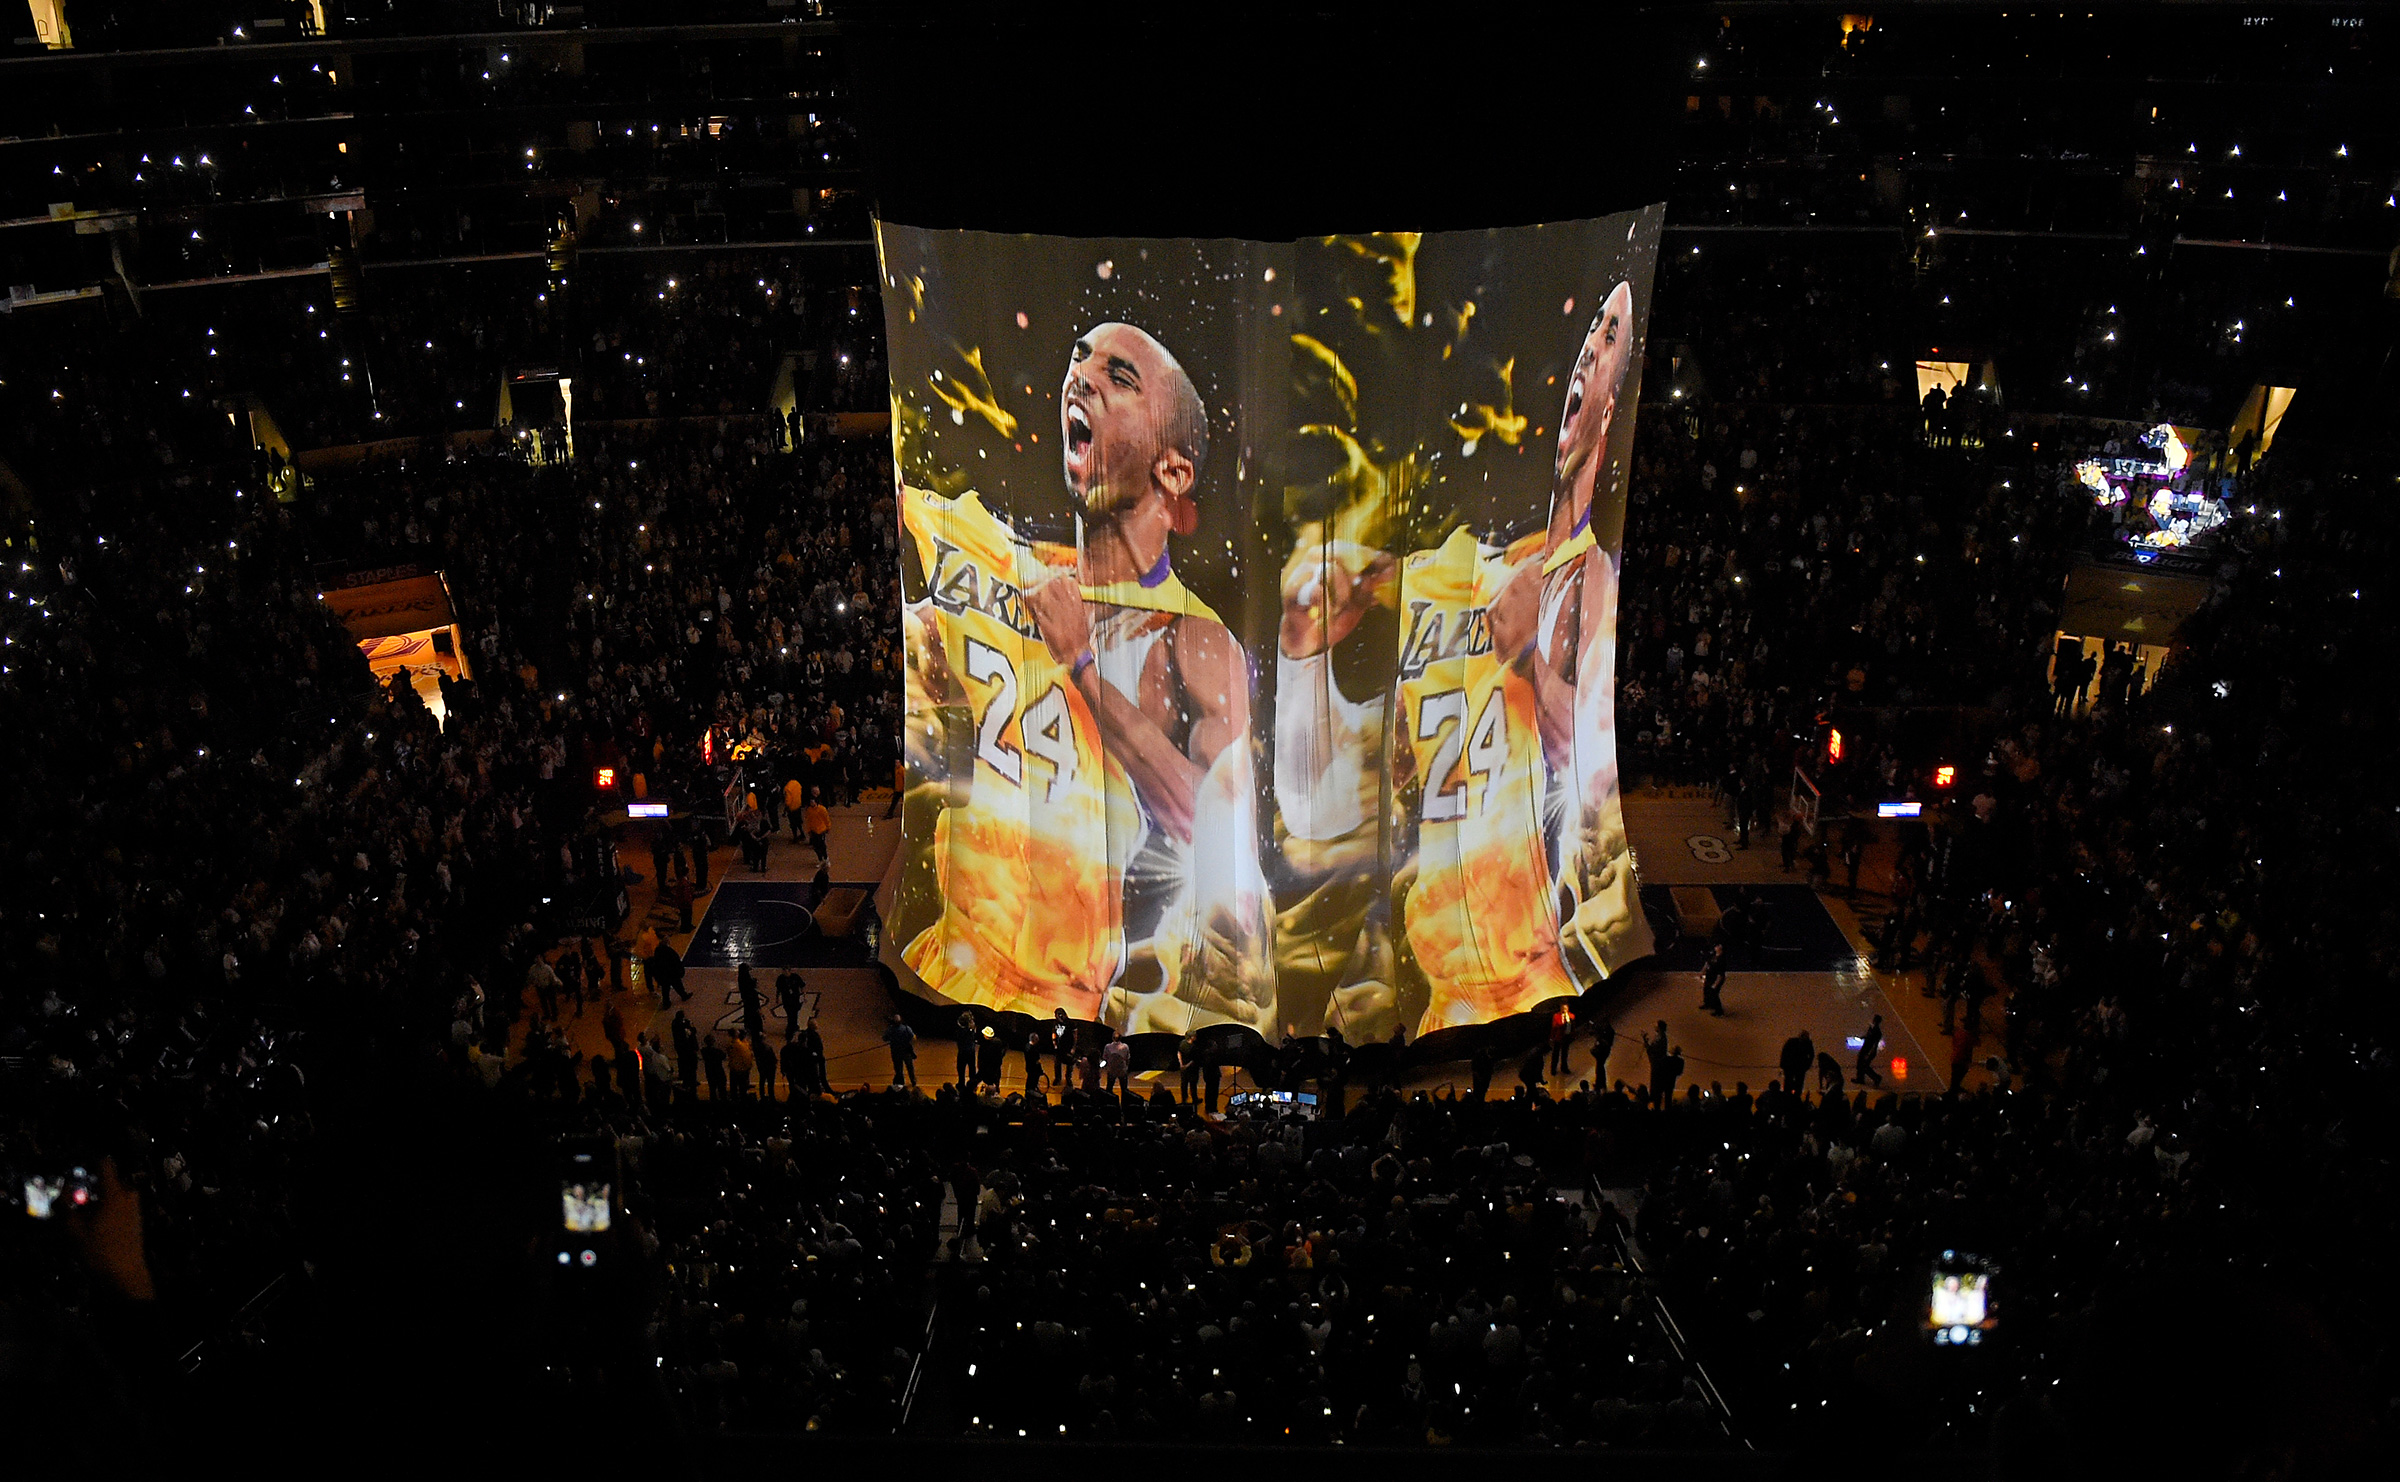 Los Angeles Lakers forward Kobe Bryant's image is displayed to the crowd during a ceremony before Bryant's last game on April 13, 2016. (Mark J. Terrill—AP)